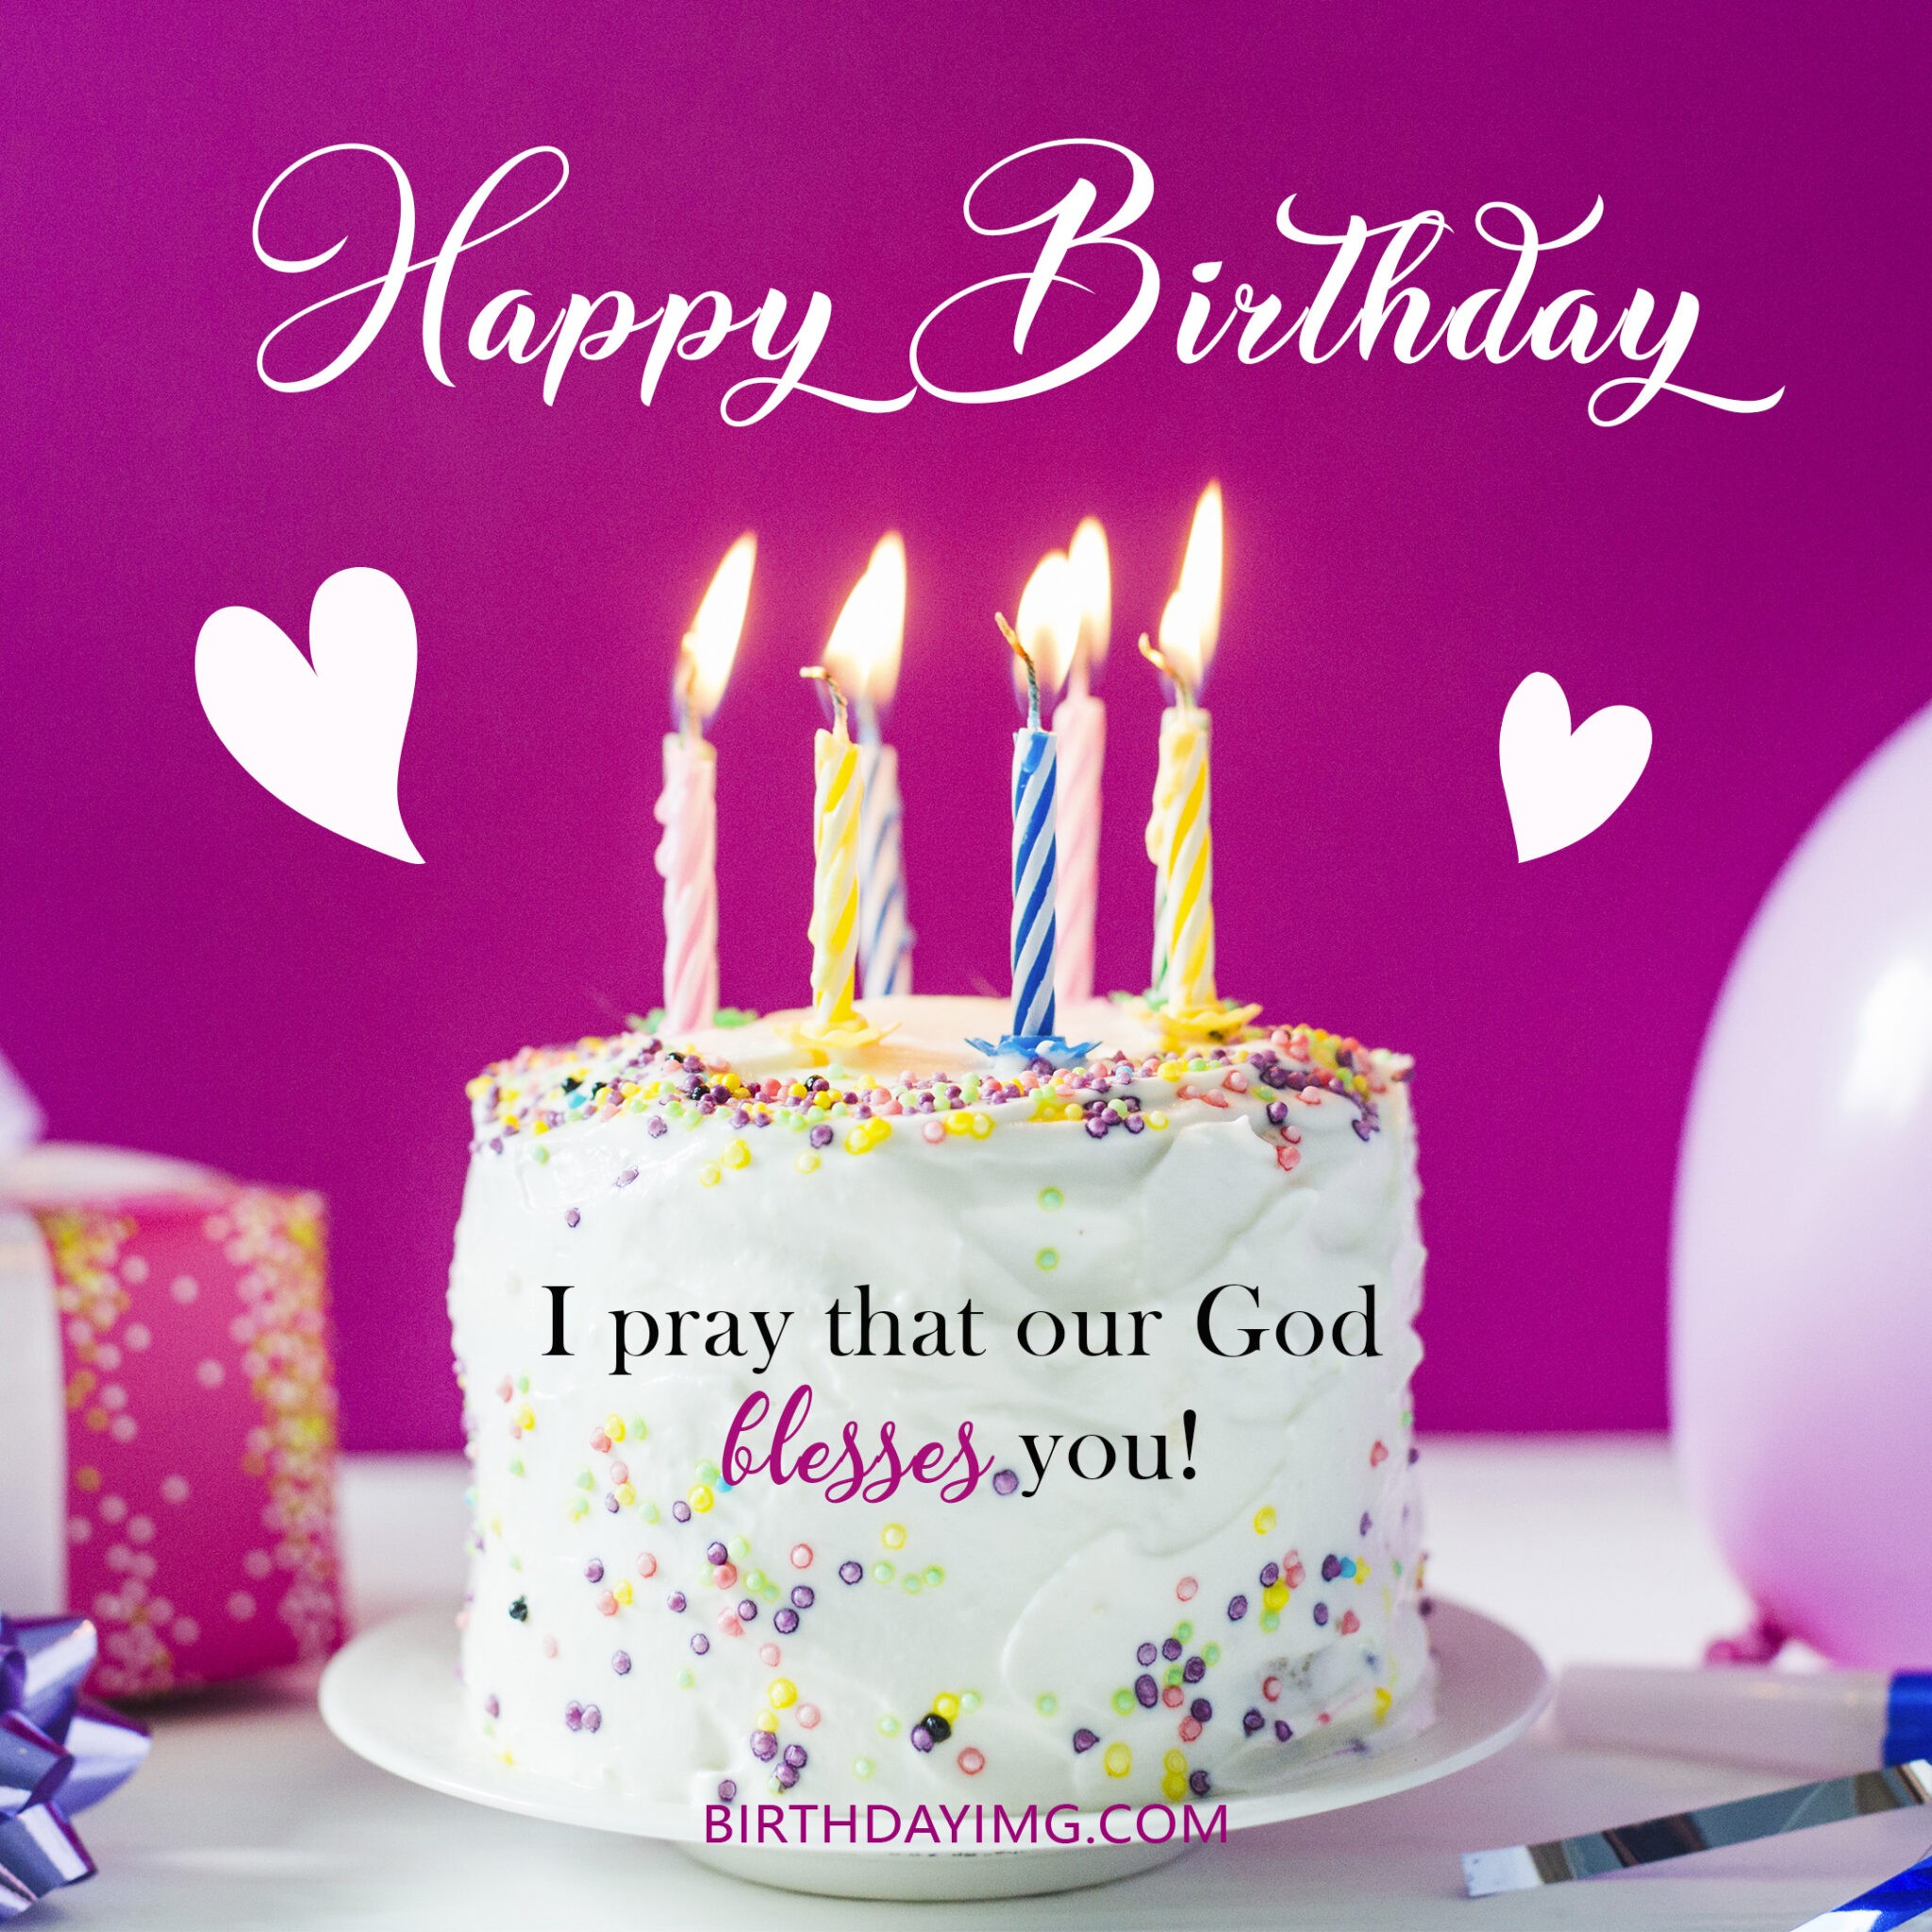 Free Happy Birthday wishes and Images with Blessings - birthdayimg.com